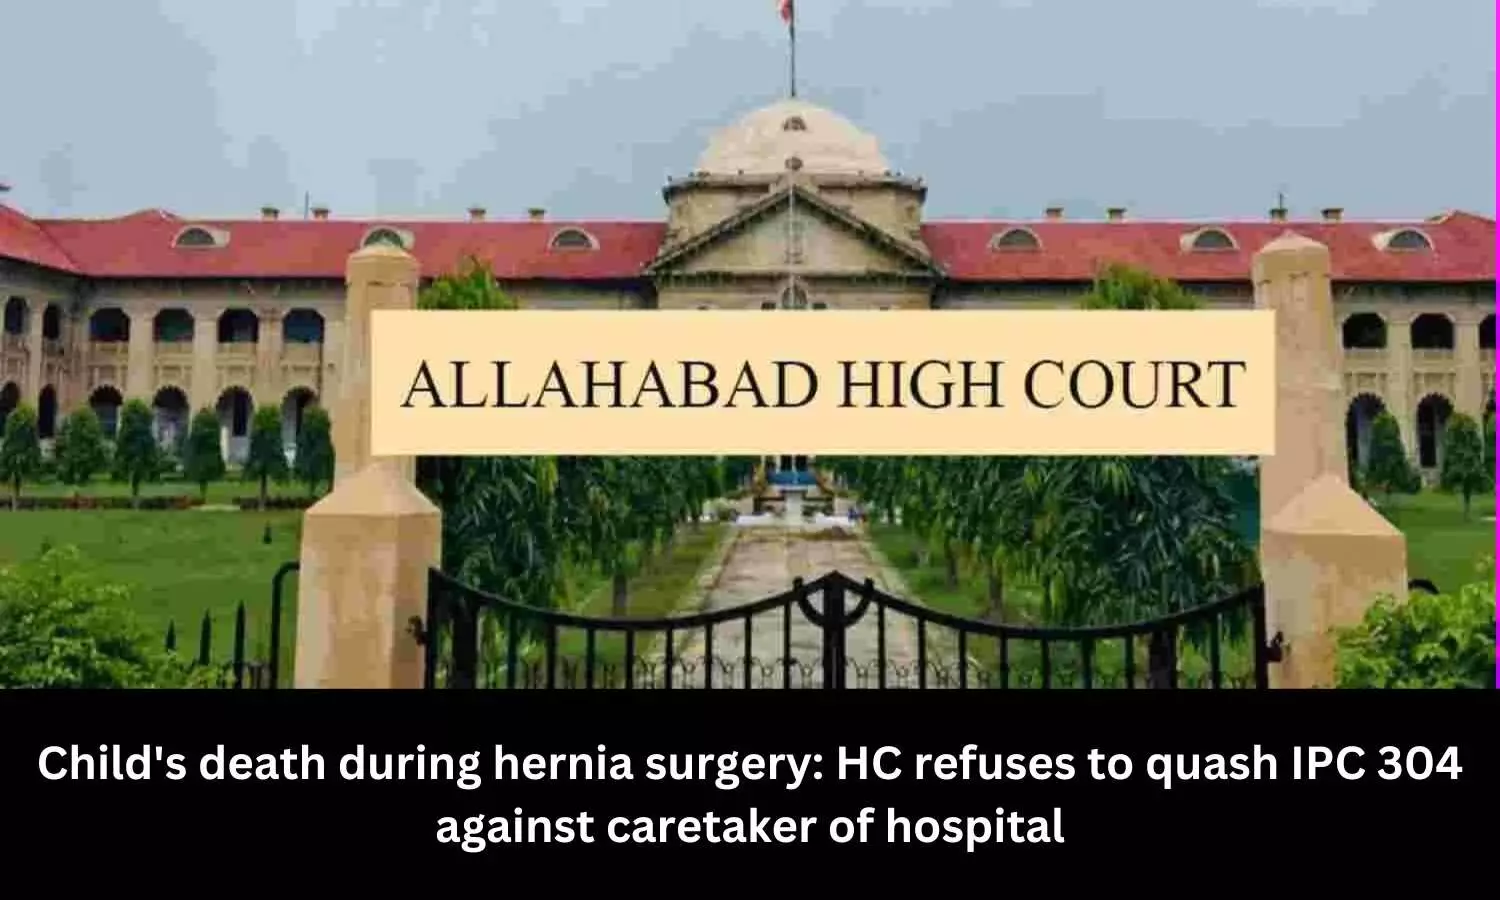 Childs death during hernia surgery: HC refuses to quash IPC 304 against caretaker of hospital